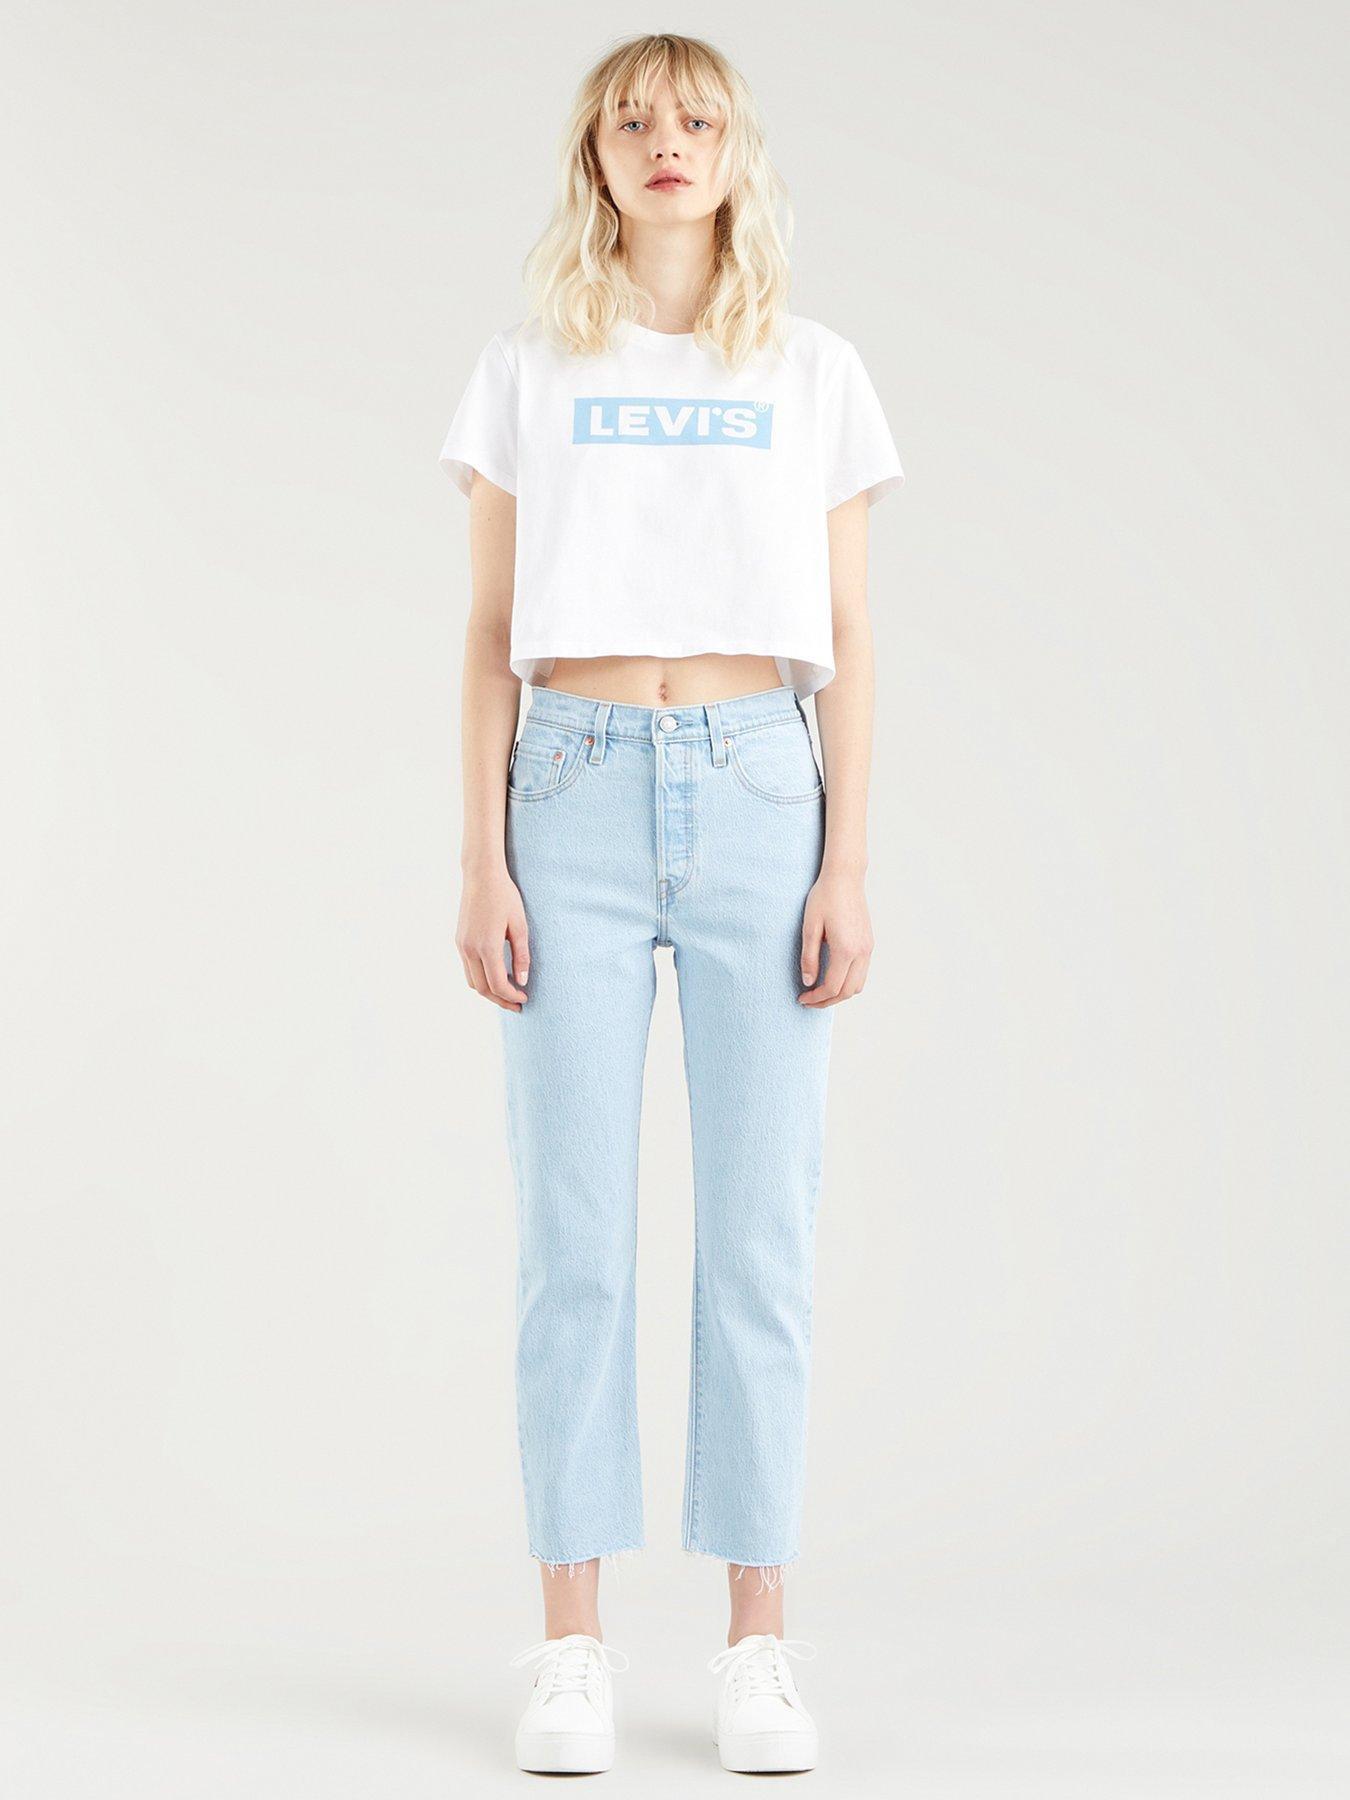 Levi's high waist straight jeans in light wash blue